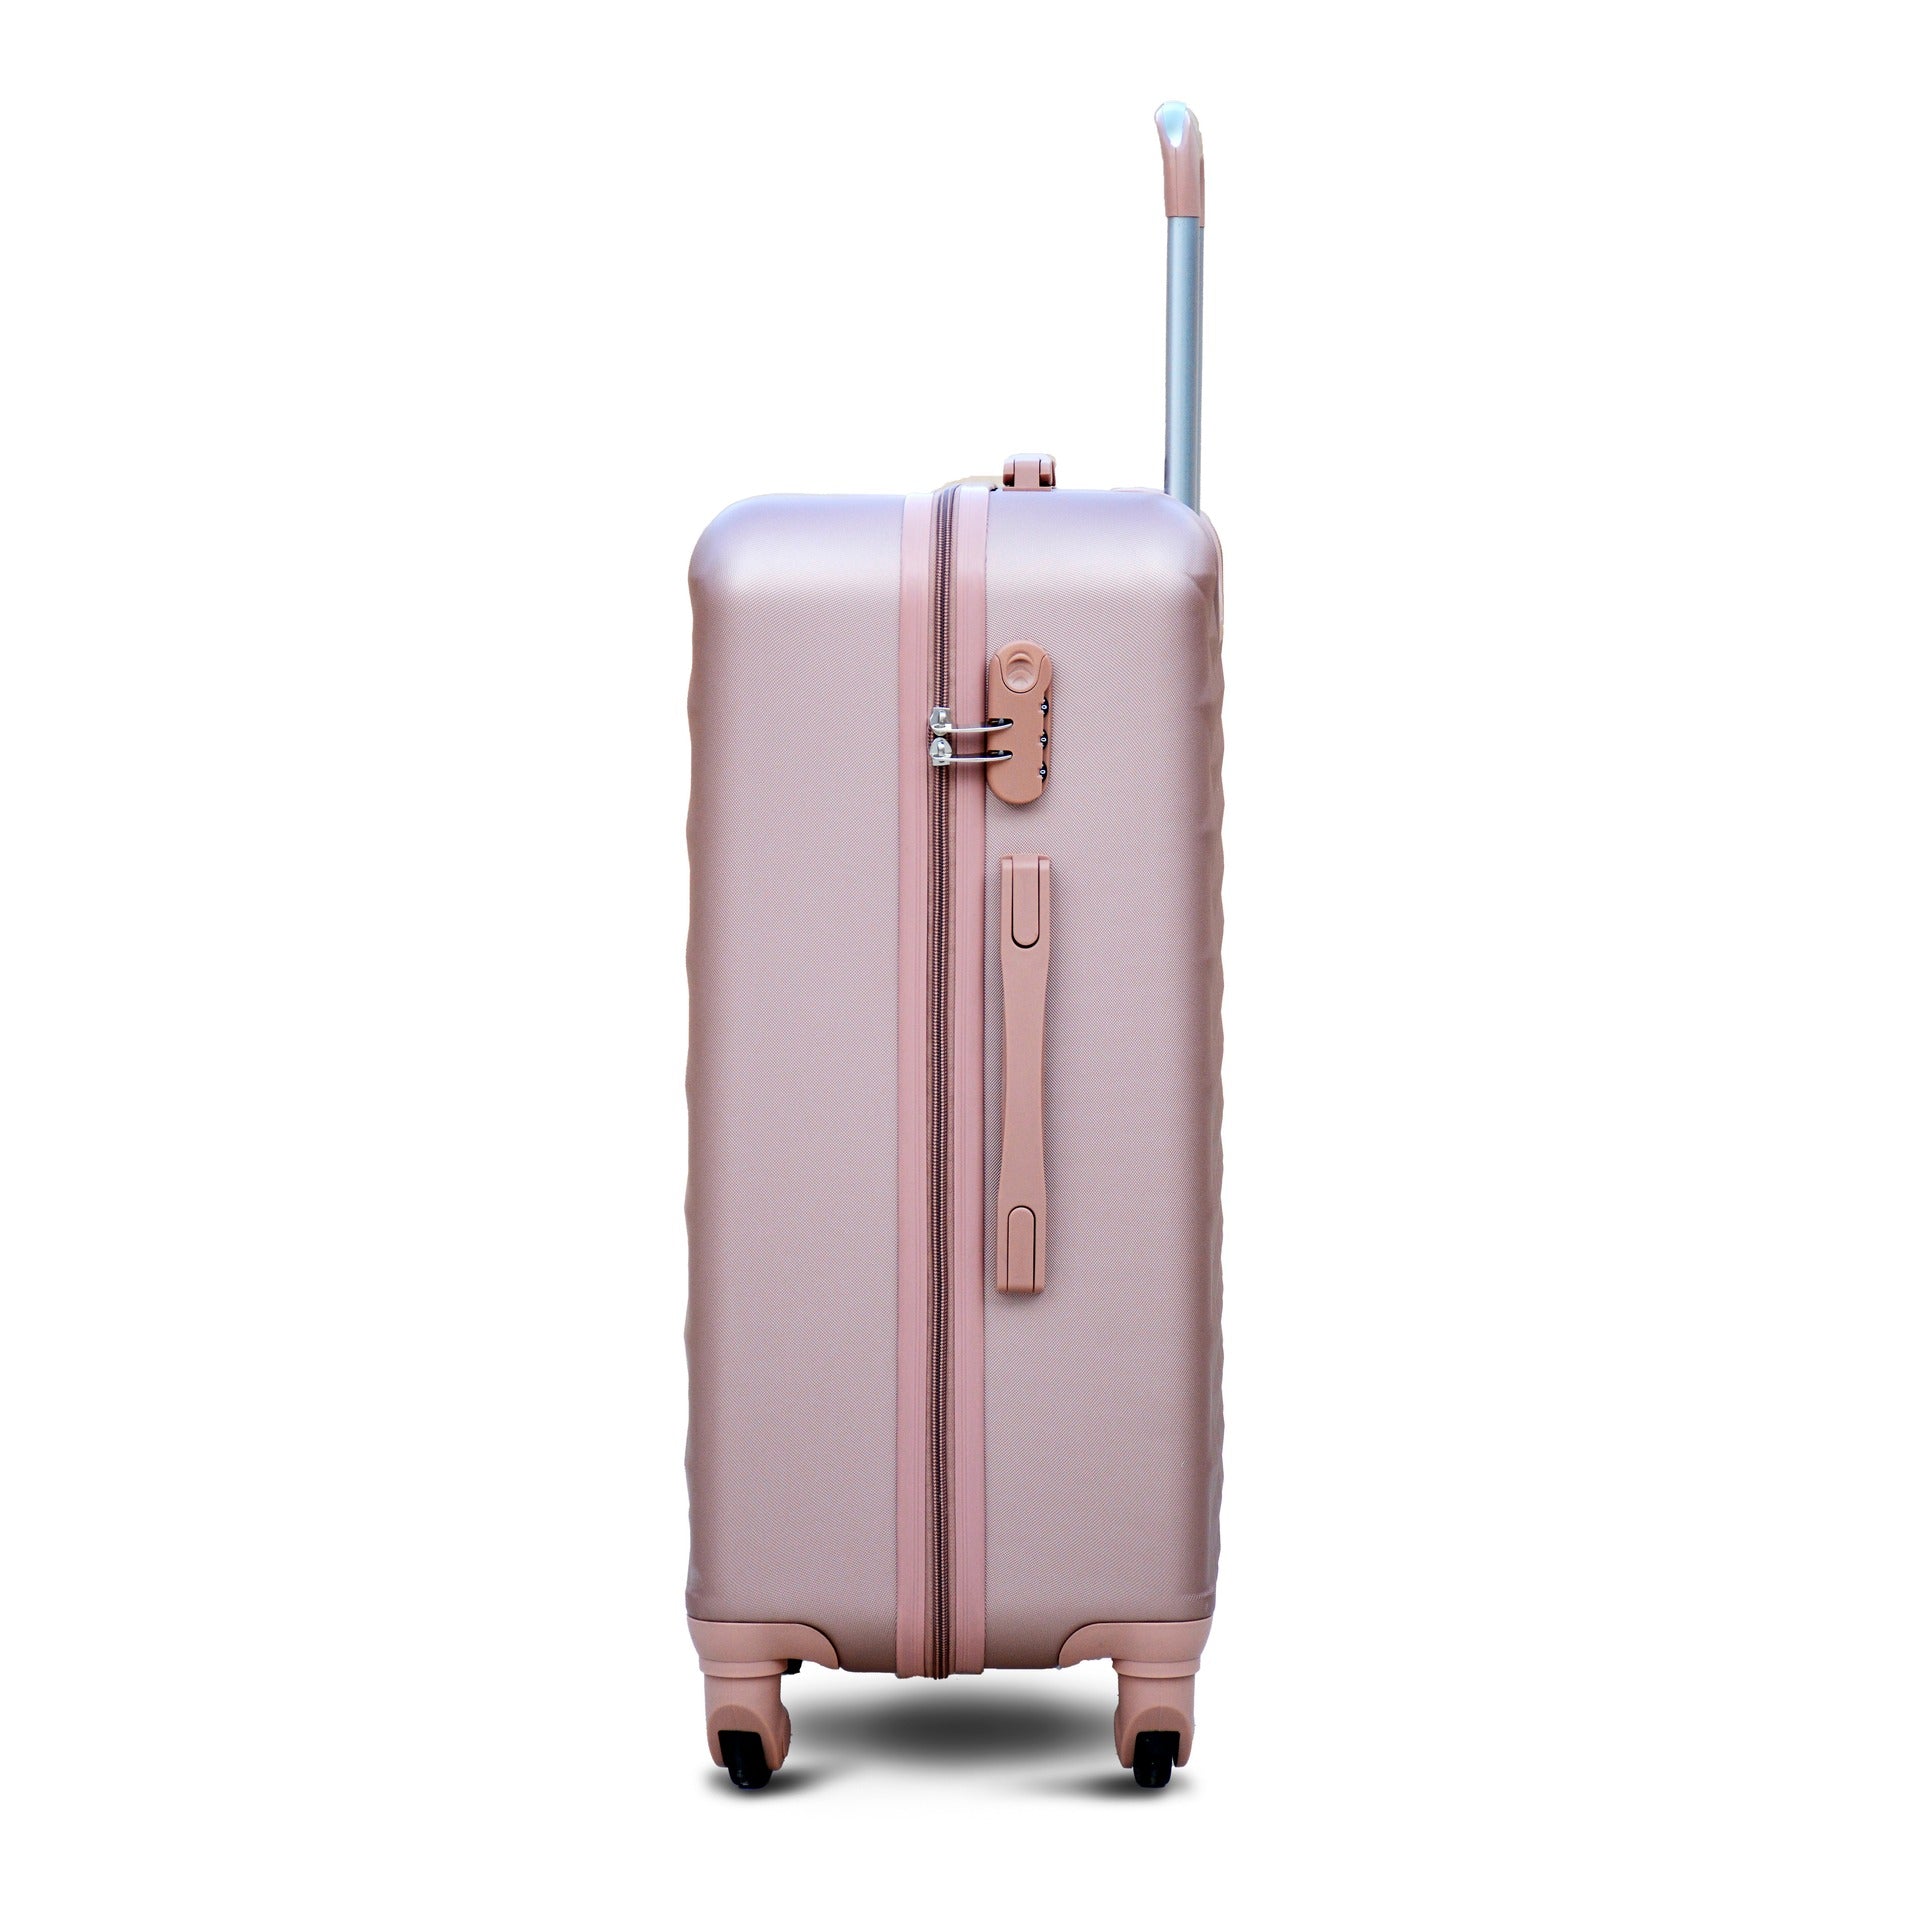 24" Diamond Cut ABS Lightweight Luggage Bag With Spinner Wheel